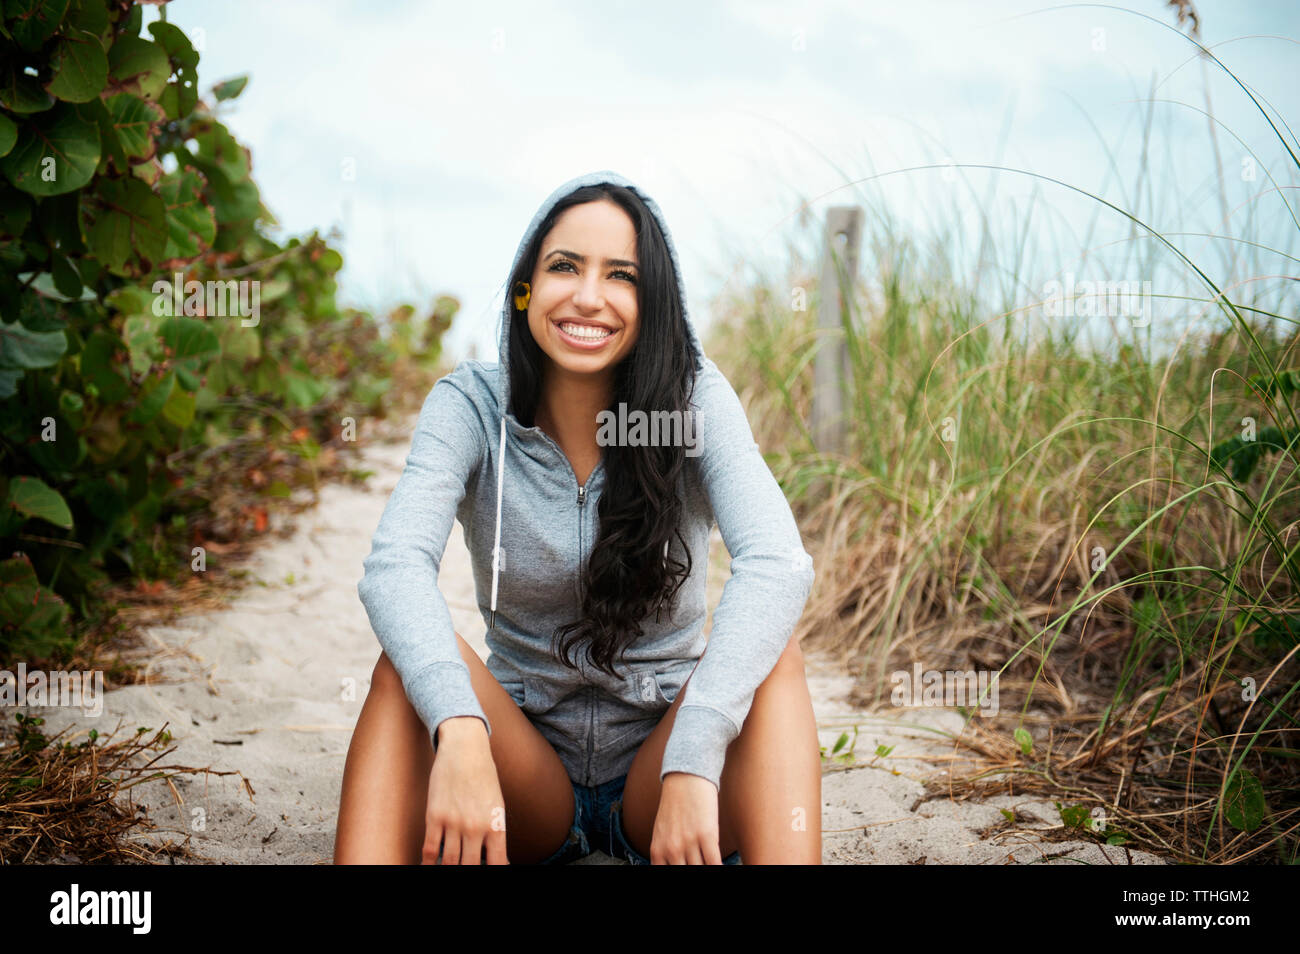 Portrait of happy woman sitting on beach Banque D'Images